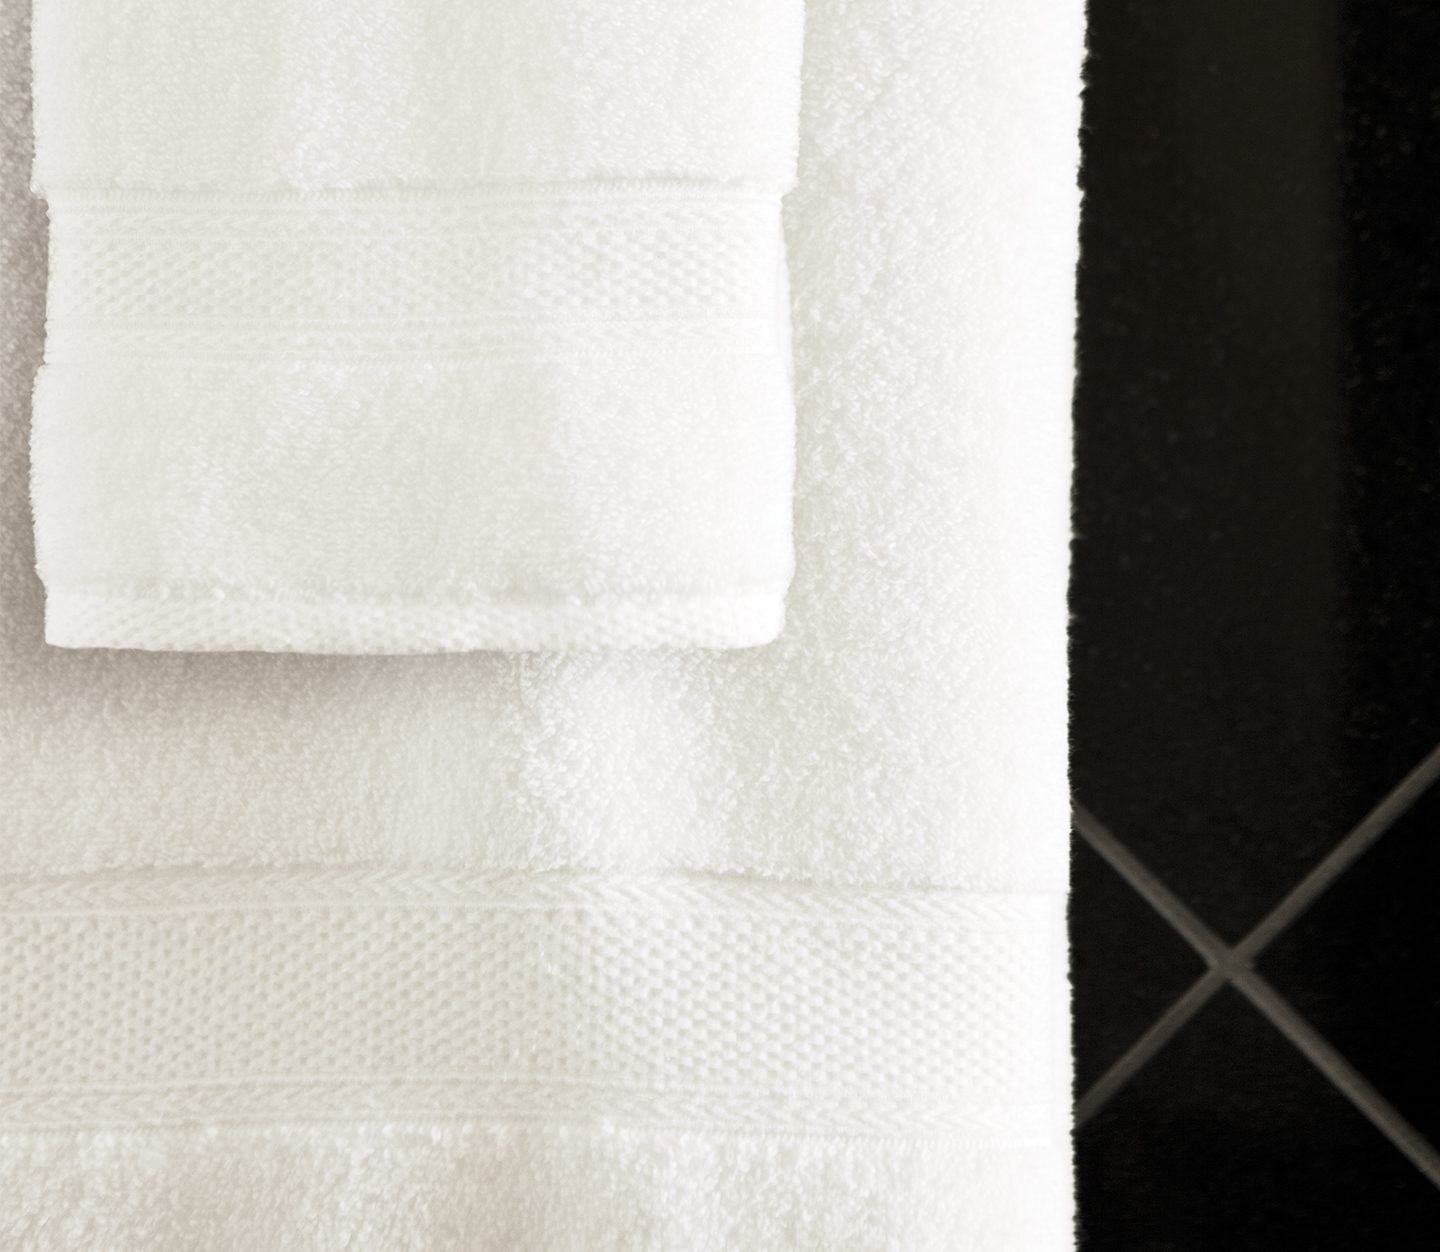 Hotel Bath Towels: Your Key to a Five-Star Bathroom Experience